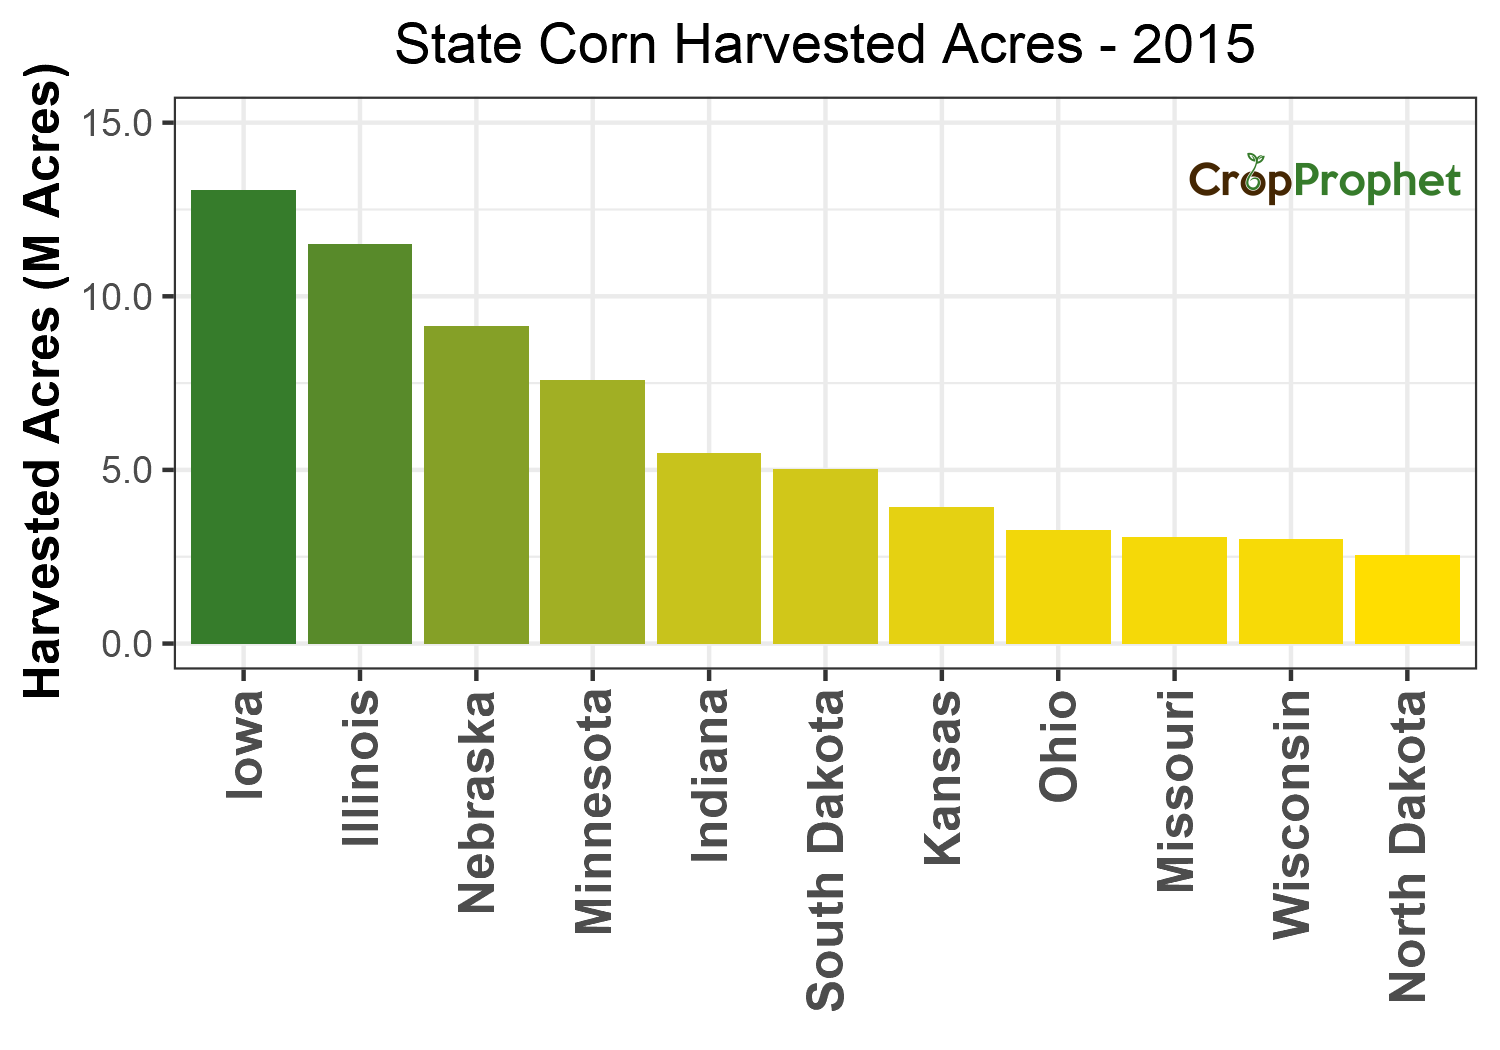 Corn Harvested Acres by State - 2015 Rankings